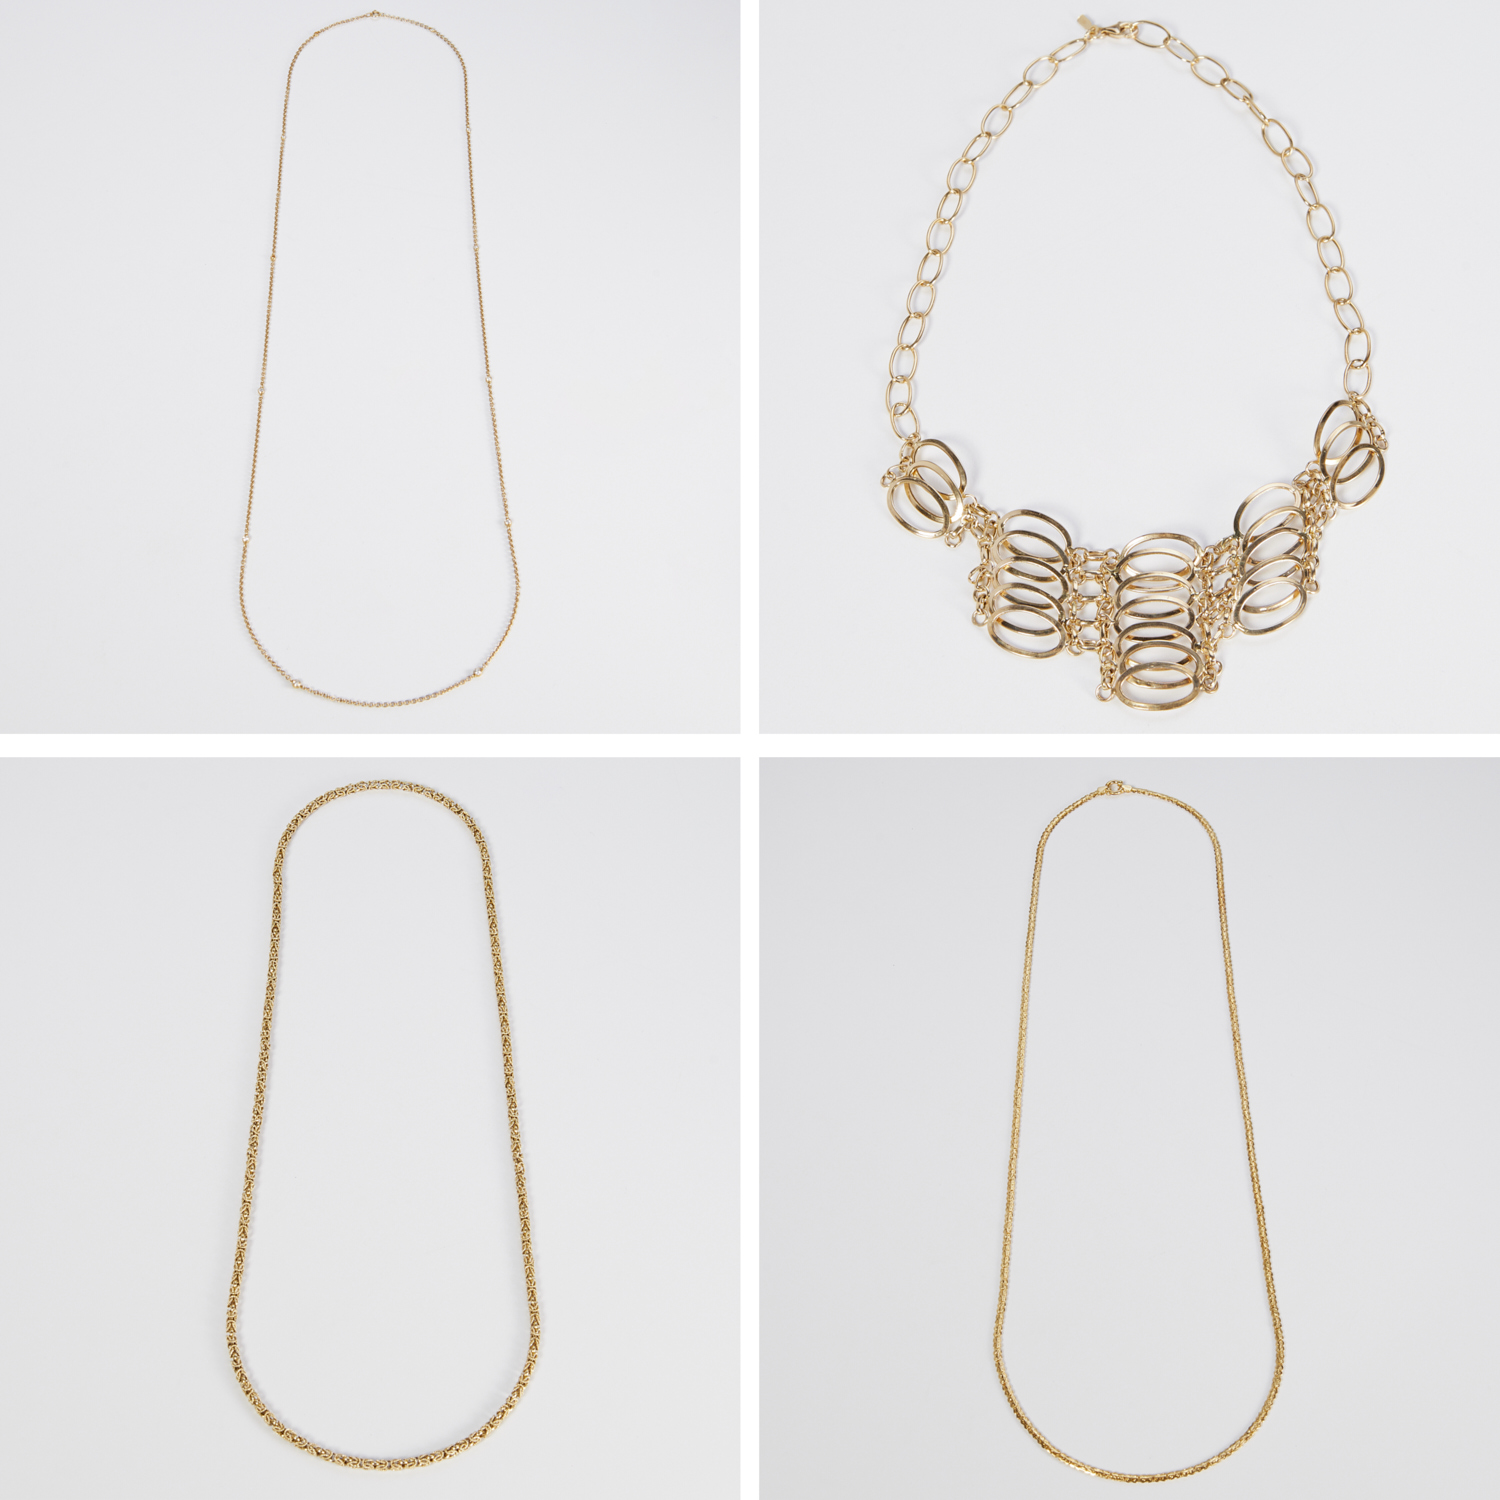 GROUP OF 14K CHAIN NECKLACES 20th